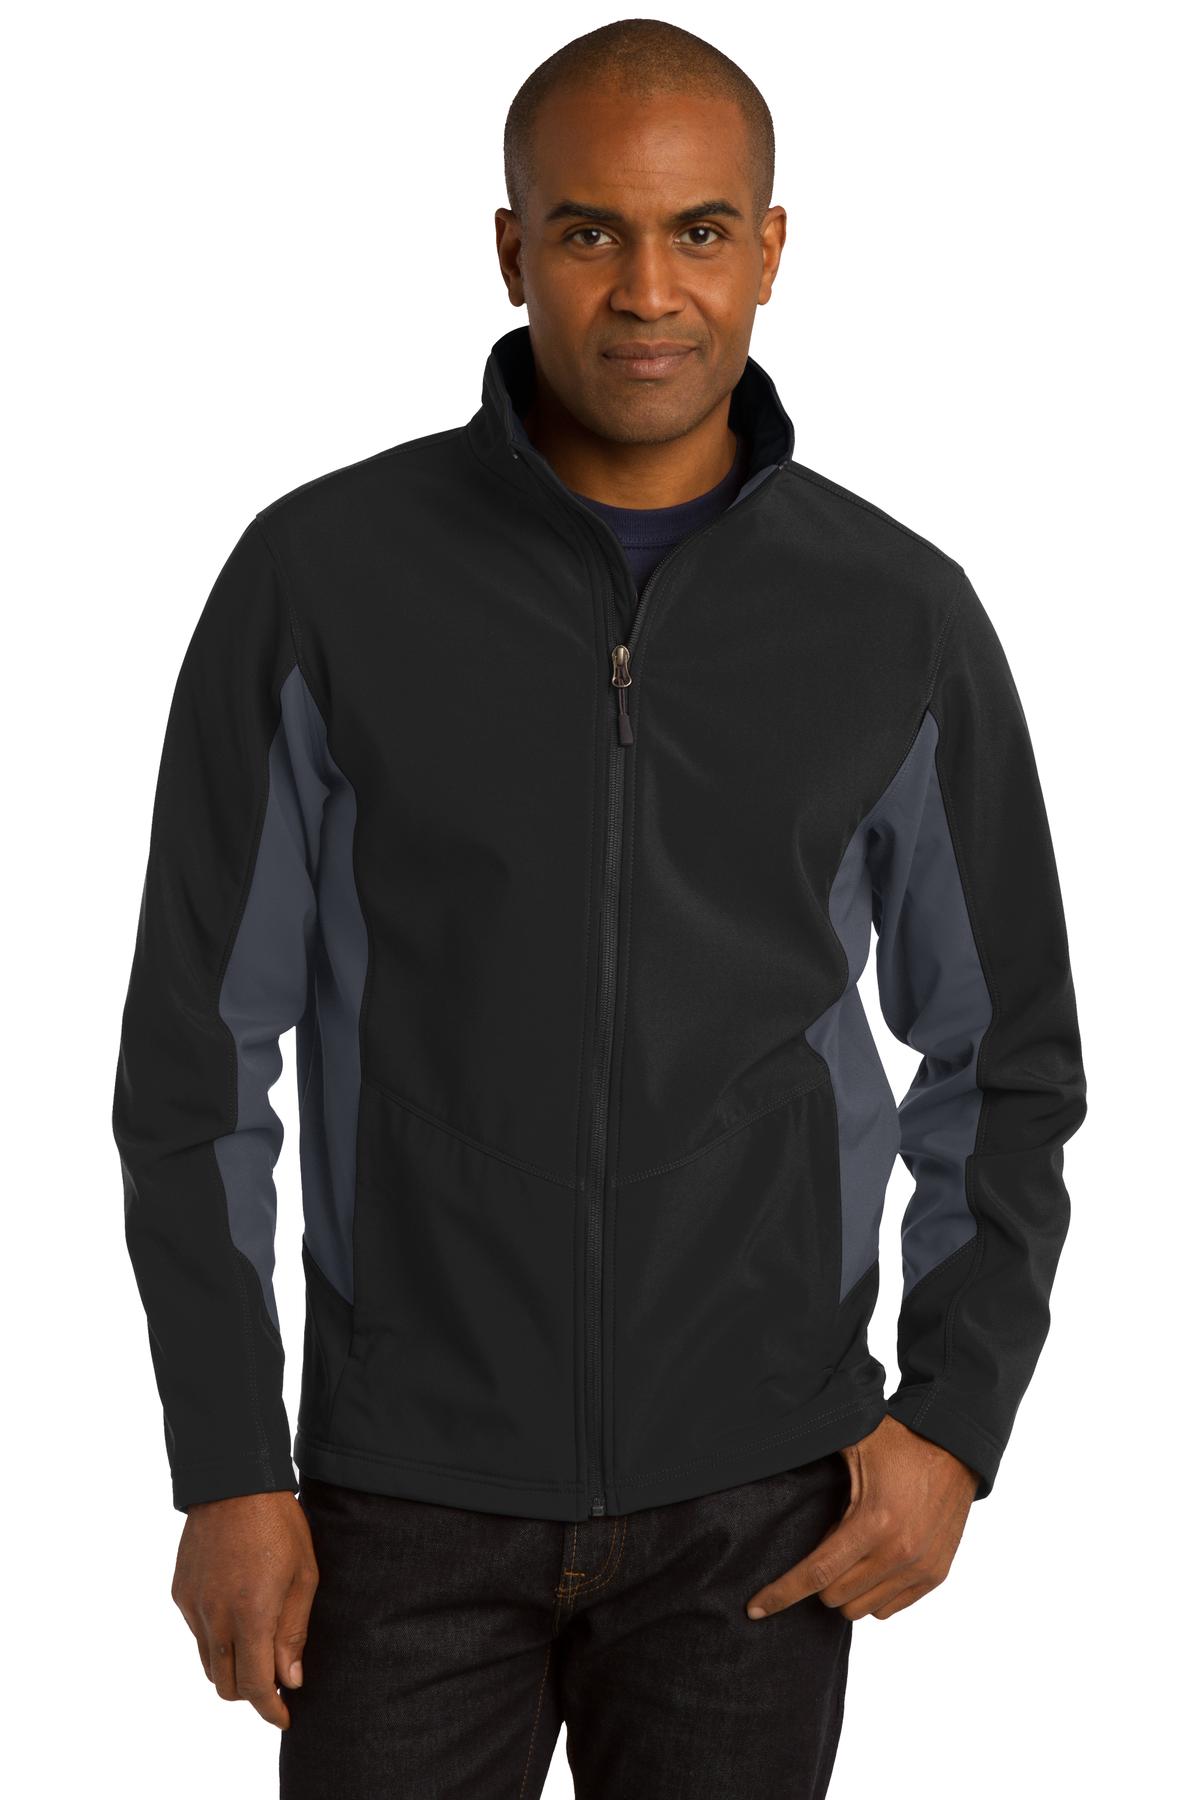 Port Authority Hospitality Outerwear ® Core Colorblock Soft Shell Jacket.-Port Authority